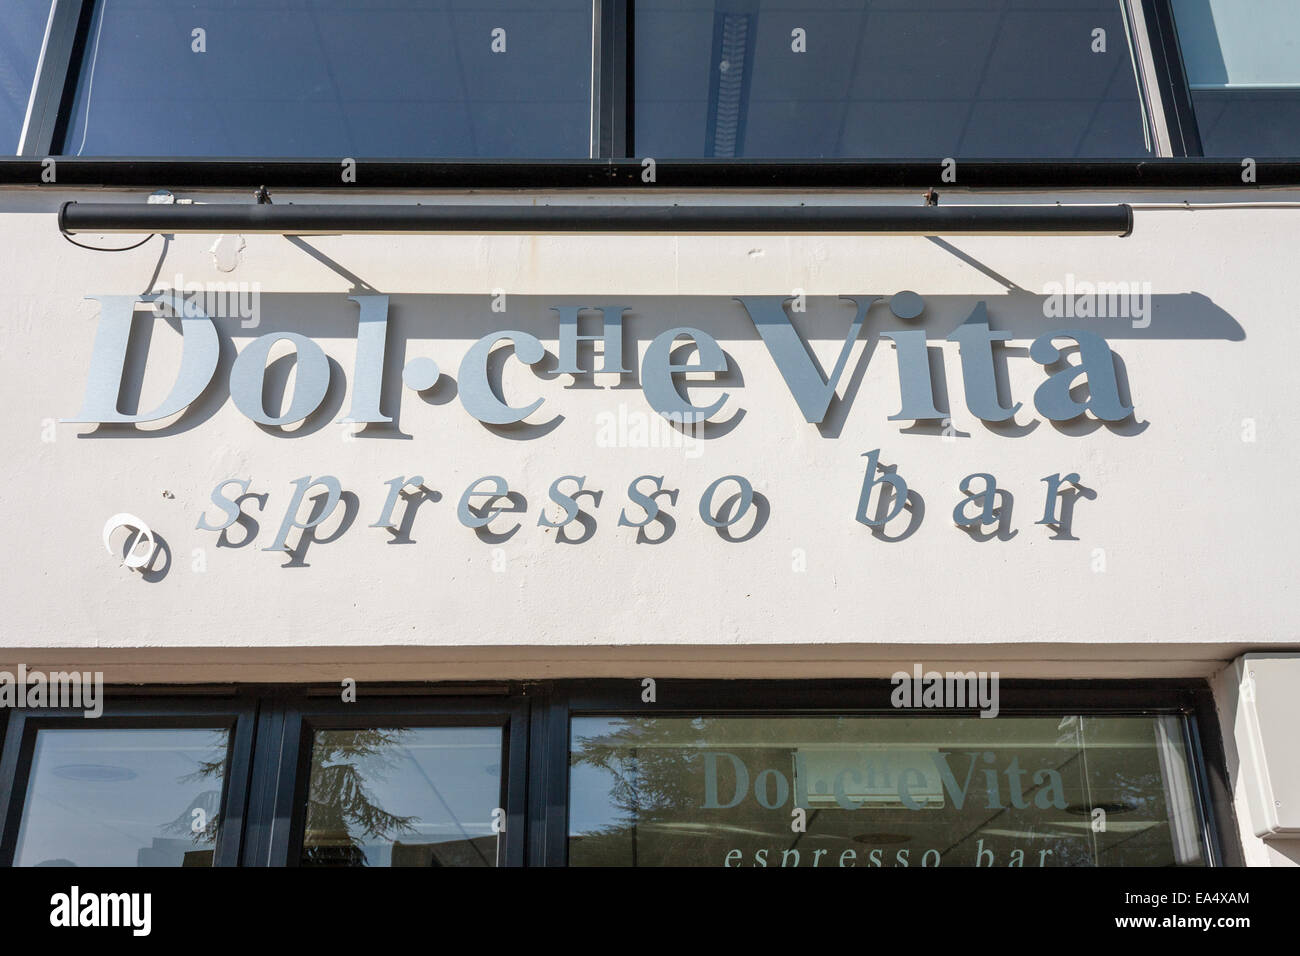 Dolce Vita coffee bar sign with fallen letter 'e'. Stock Photo